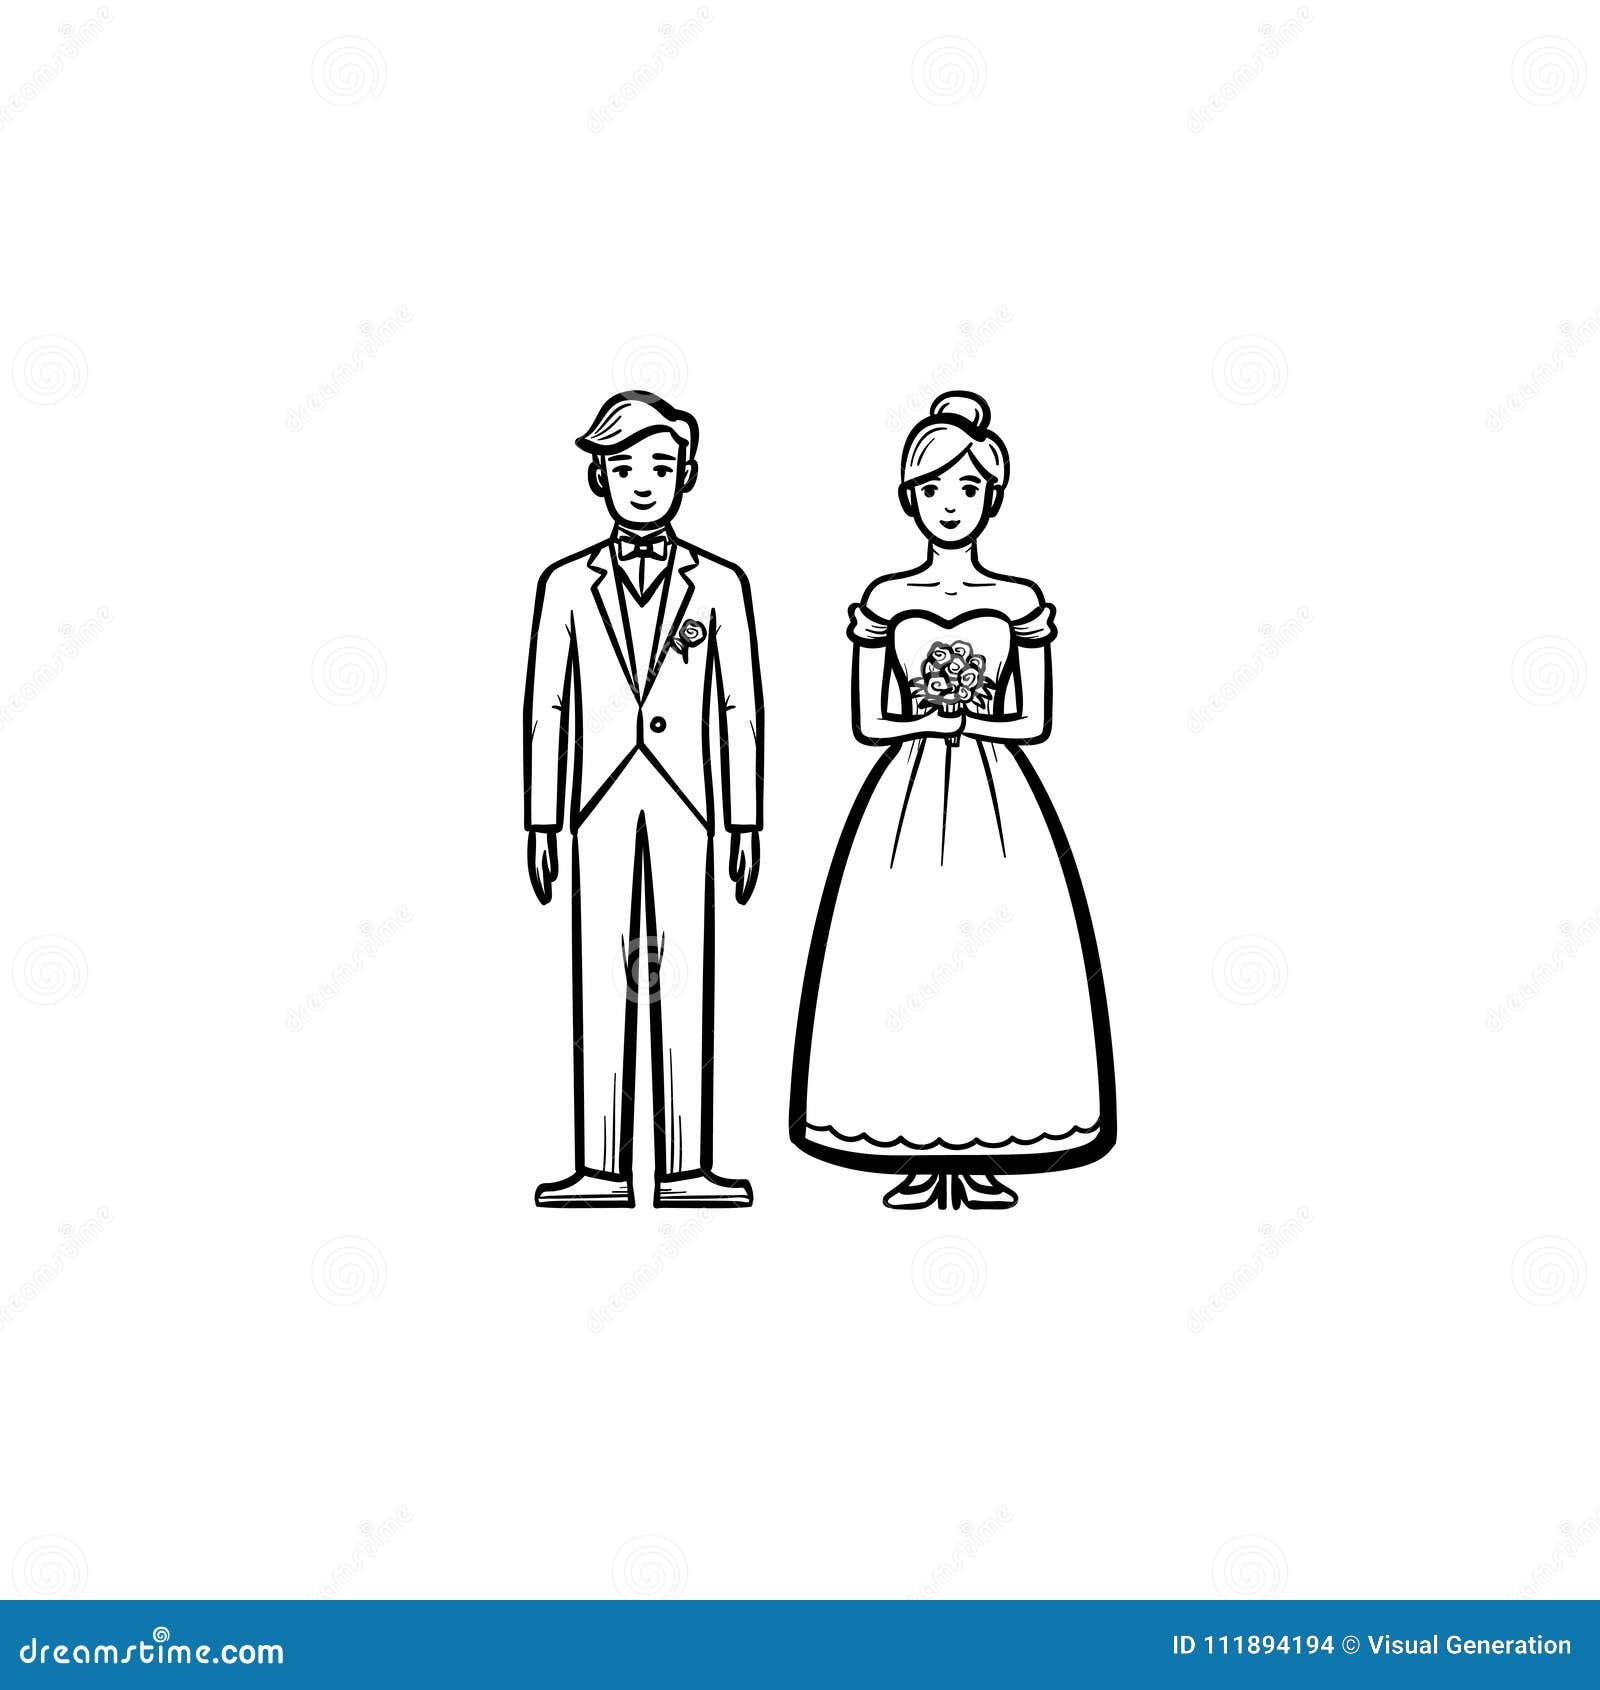 Learn How to Draw Bride and Groom for Kids Famous People Step by Step   Drawing Tutorials